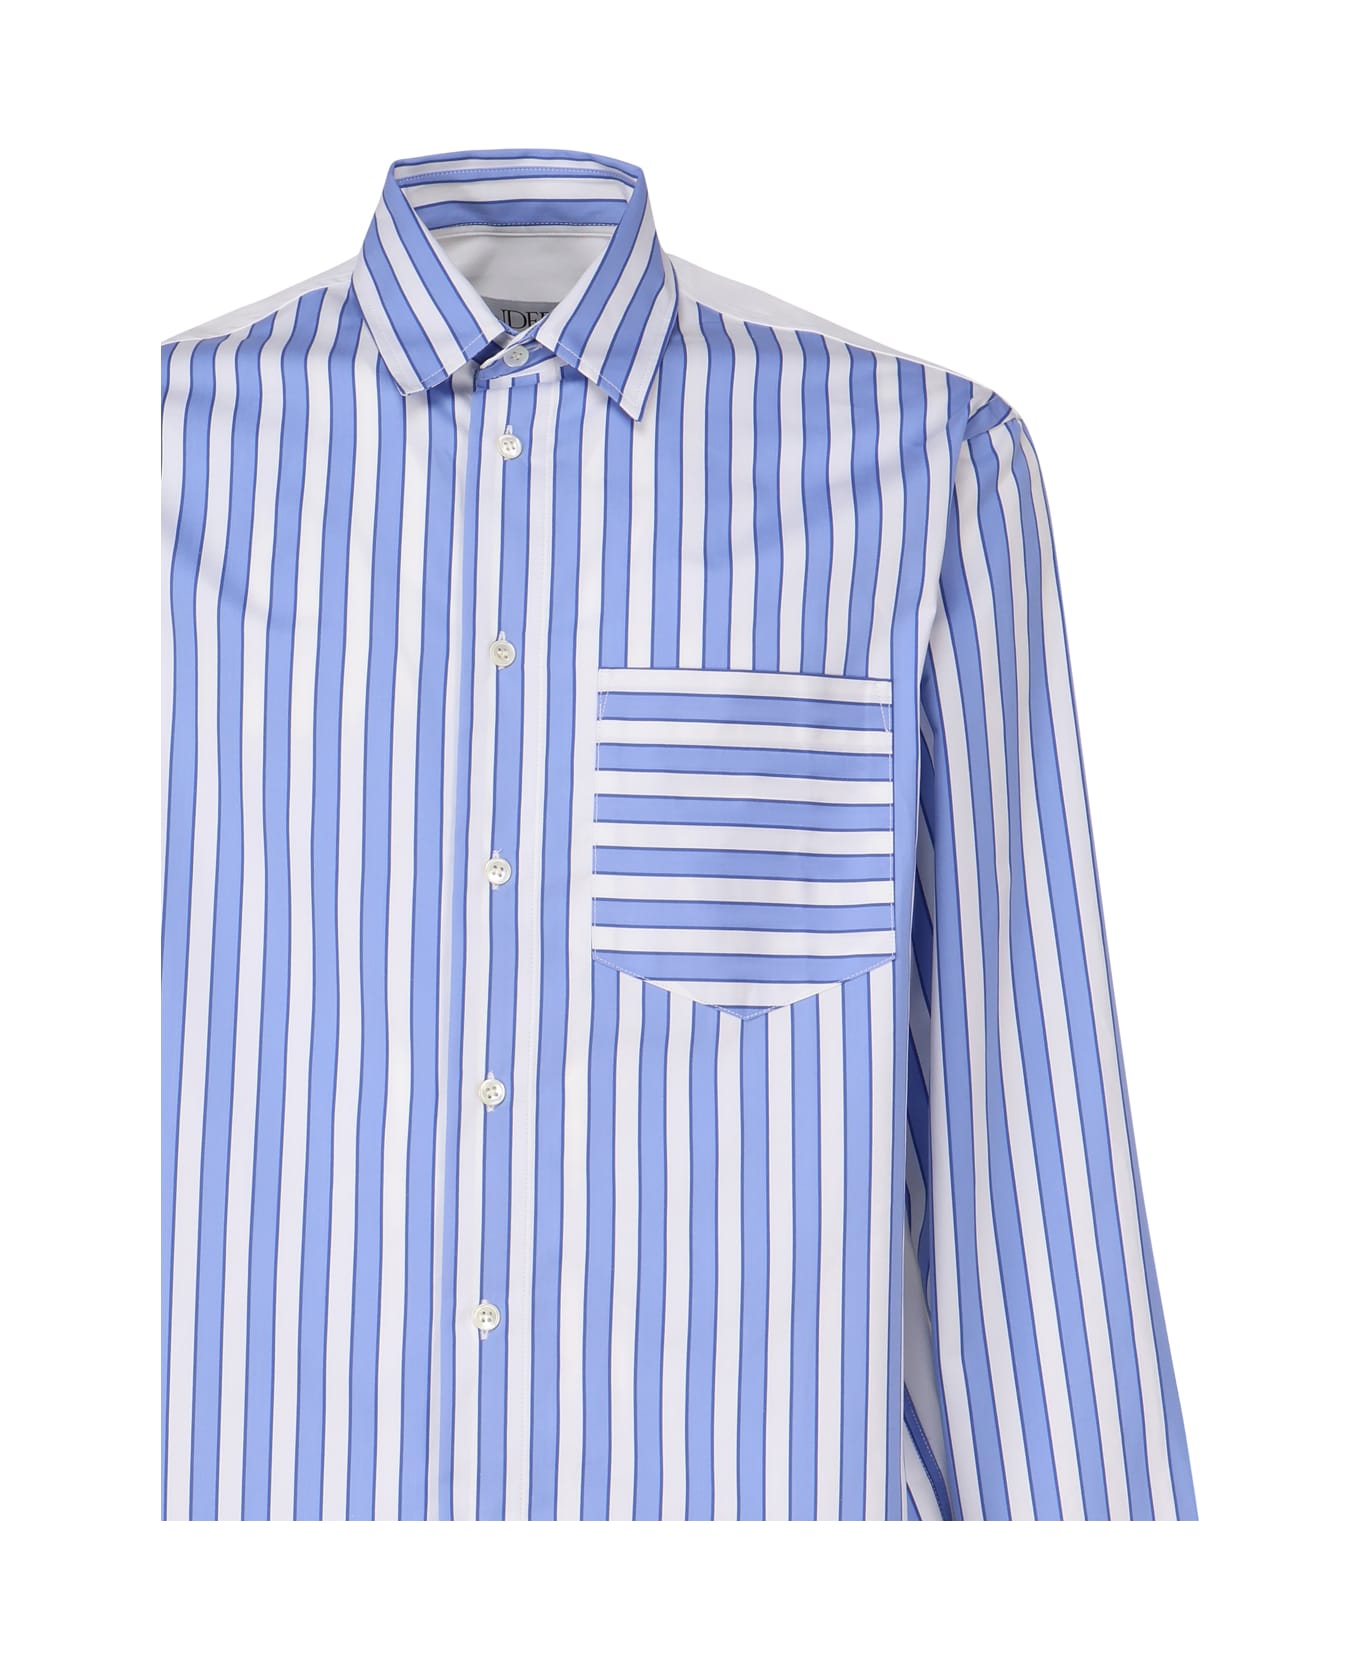 J.W. Anderson Striped Shirt With Insert Design - Light blue/white